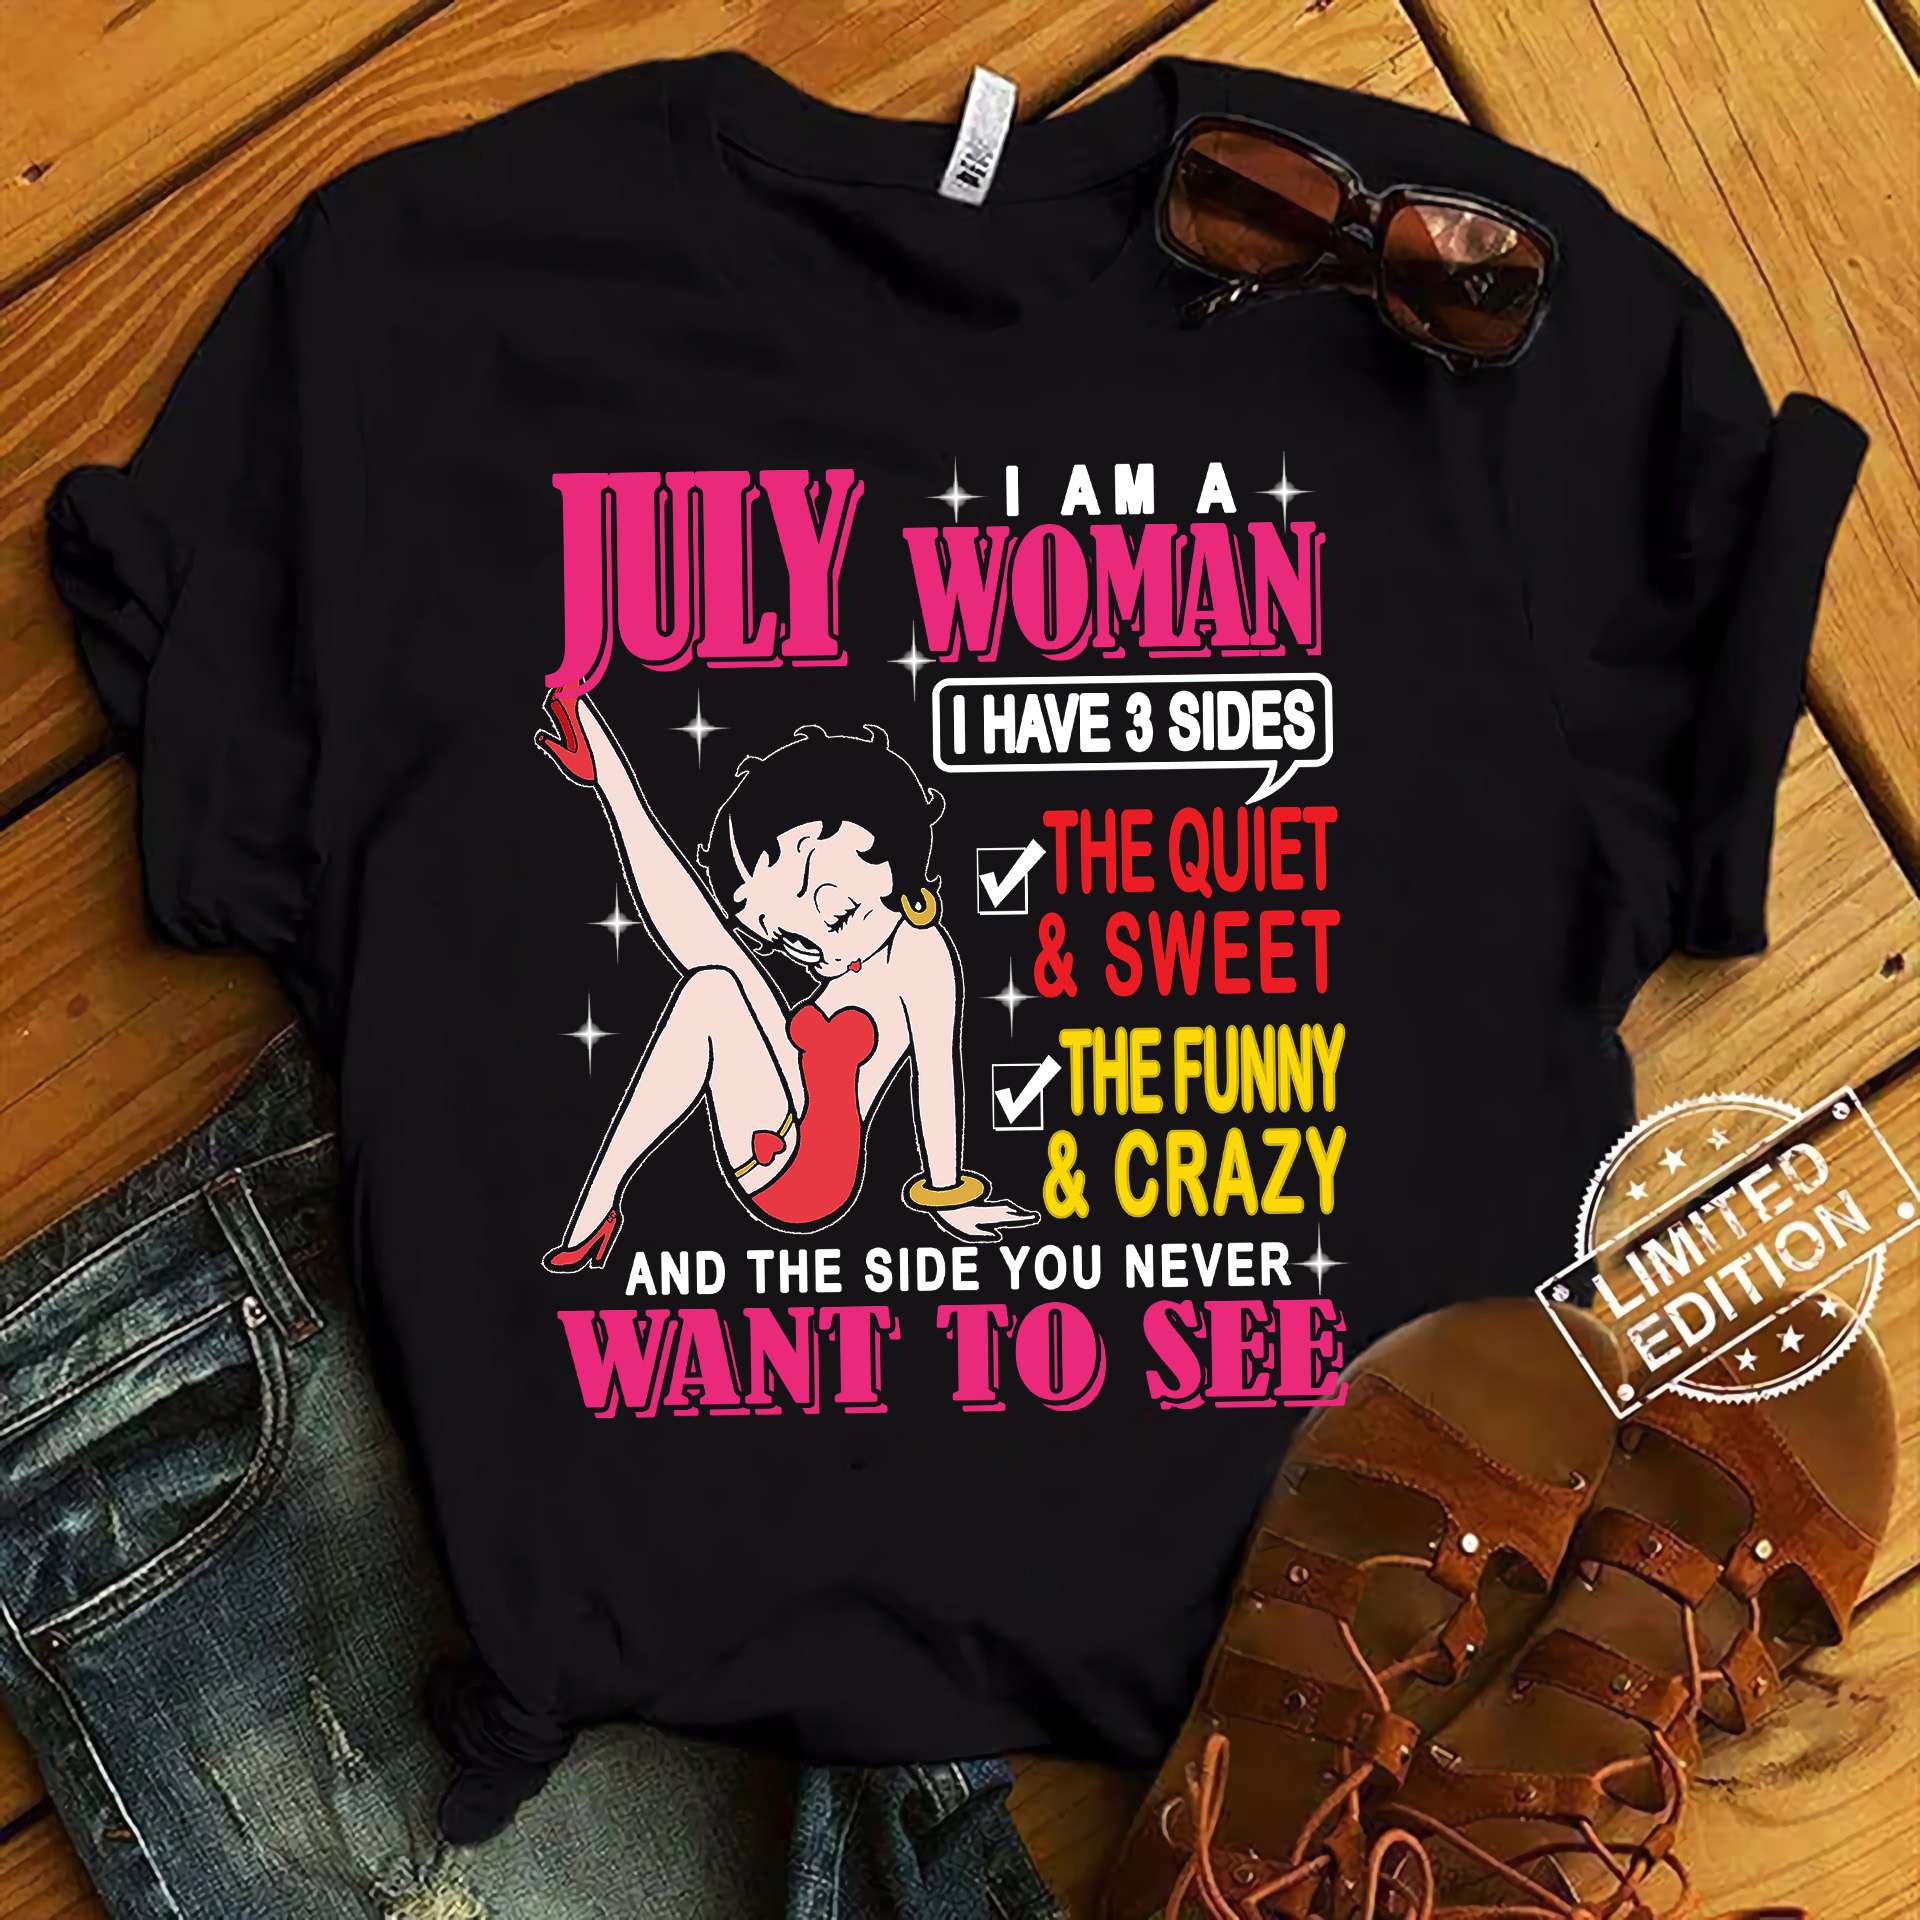 July Birthday Woman - July i am a woman i have 2 sides the quiet and sweet the funny and crazy anf the side you never want to see